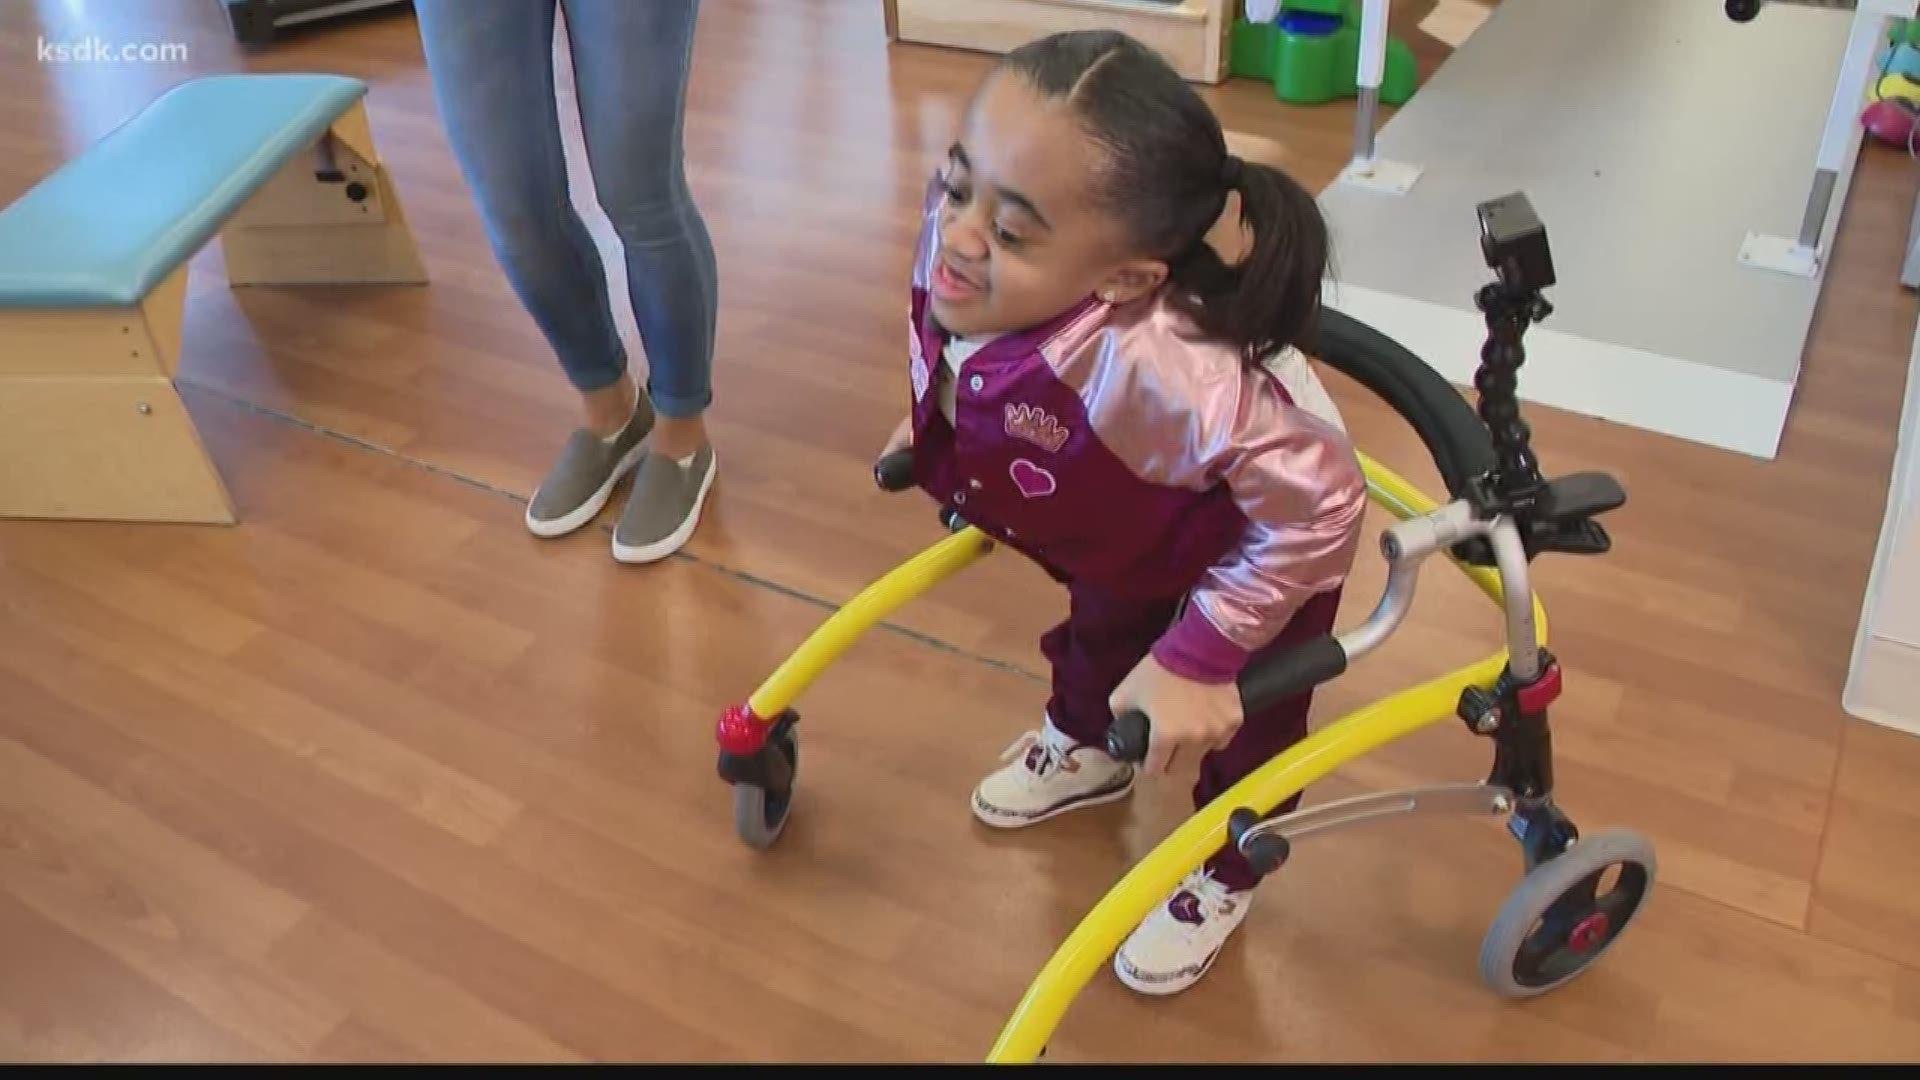 11-year-old conquers brittle bone disease